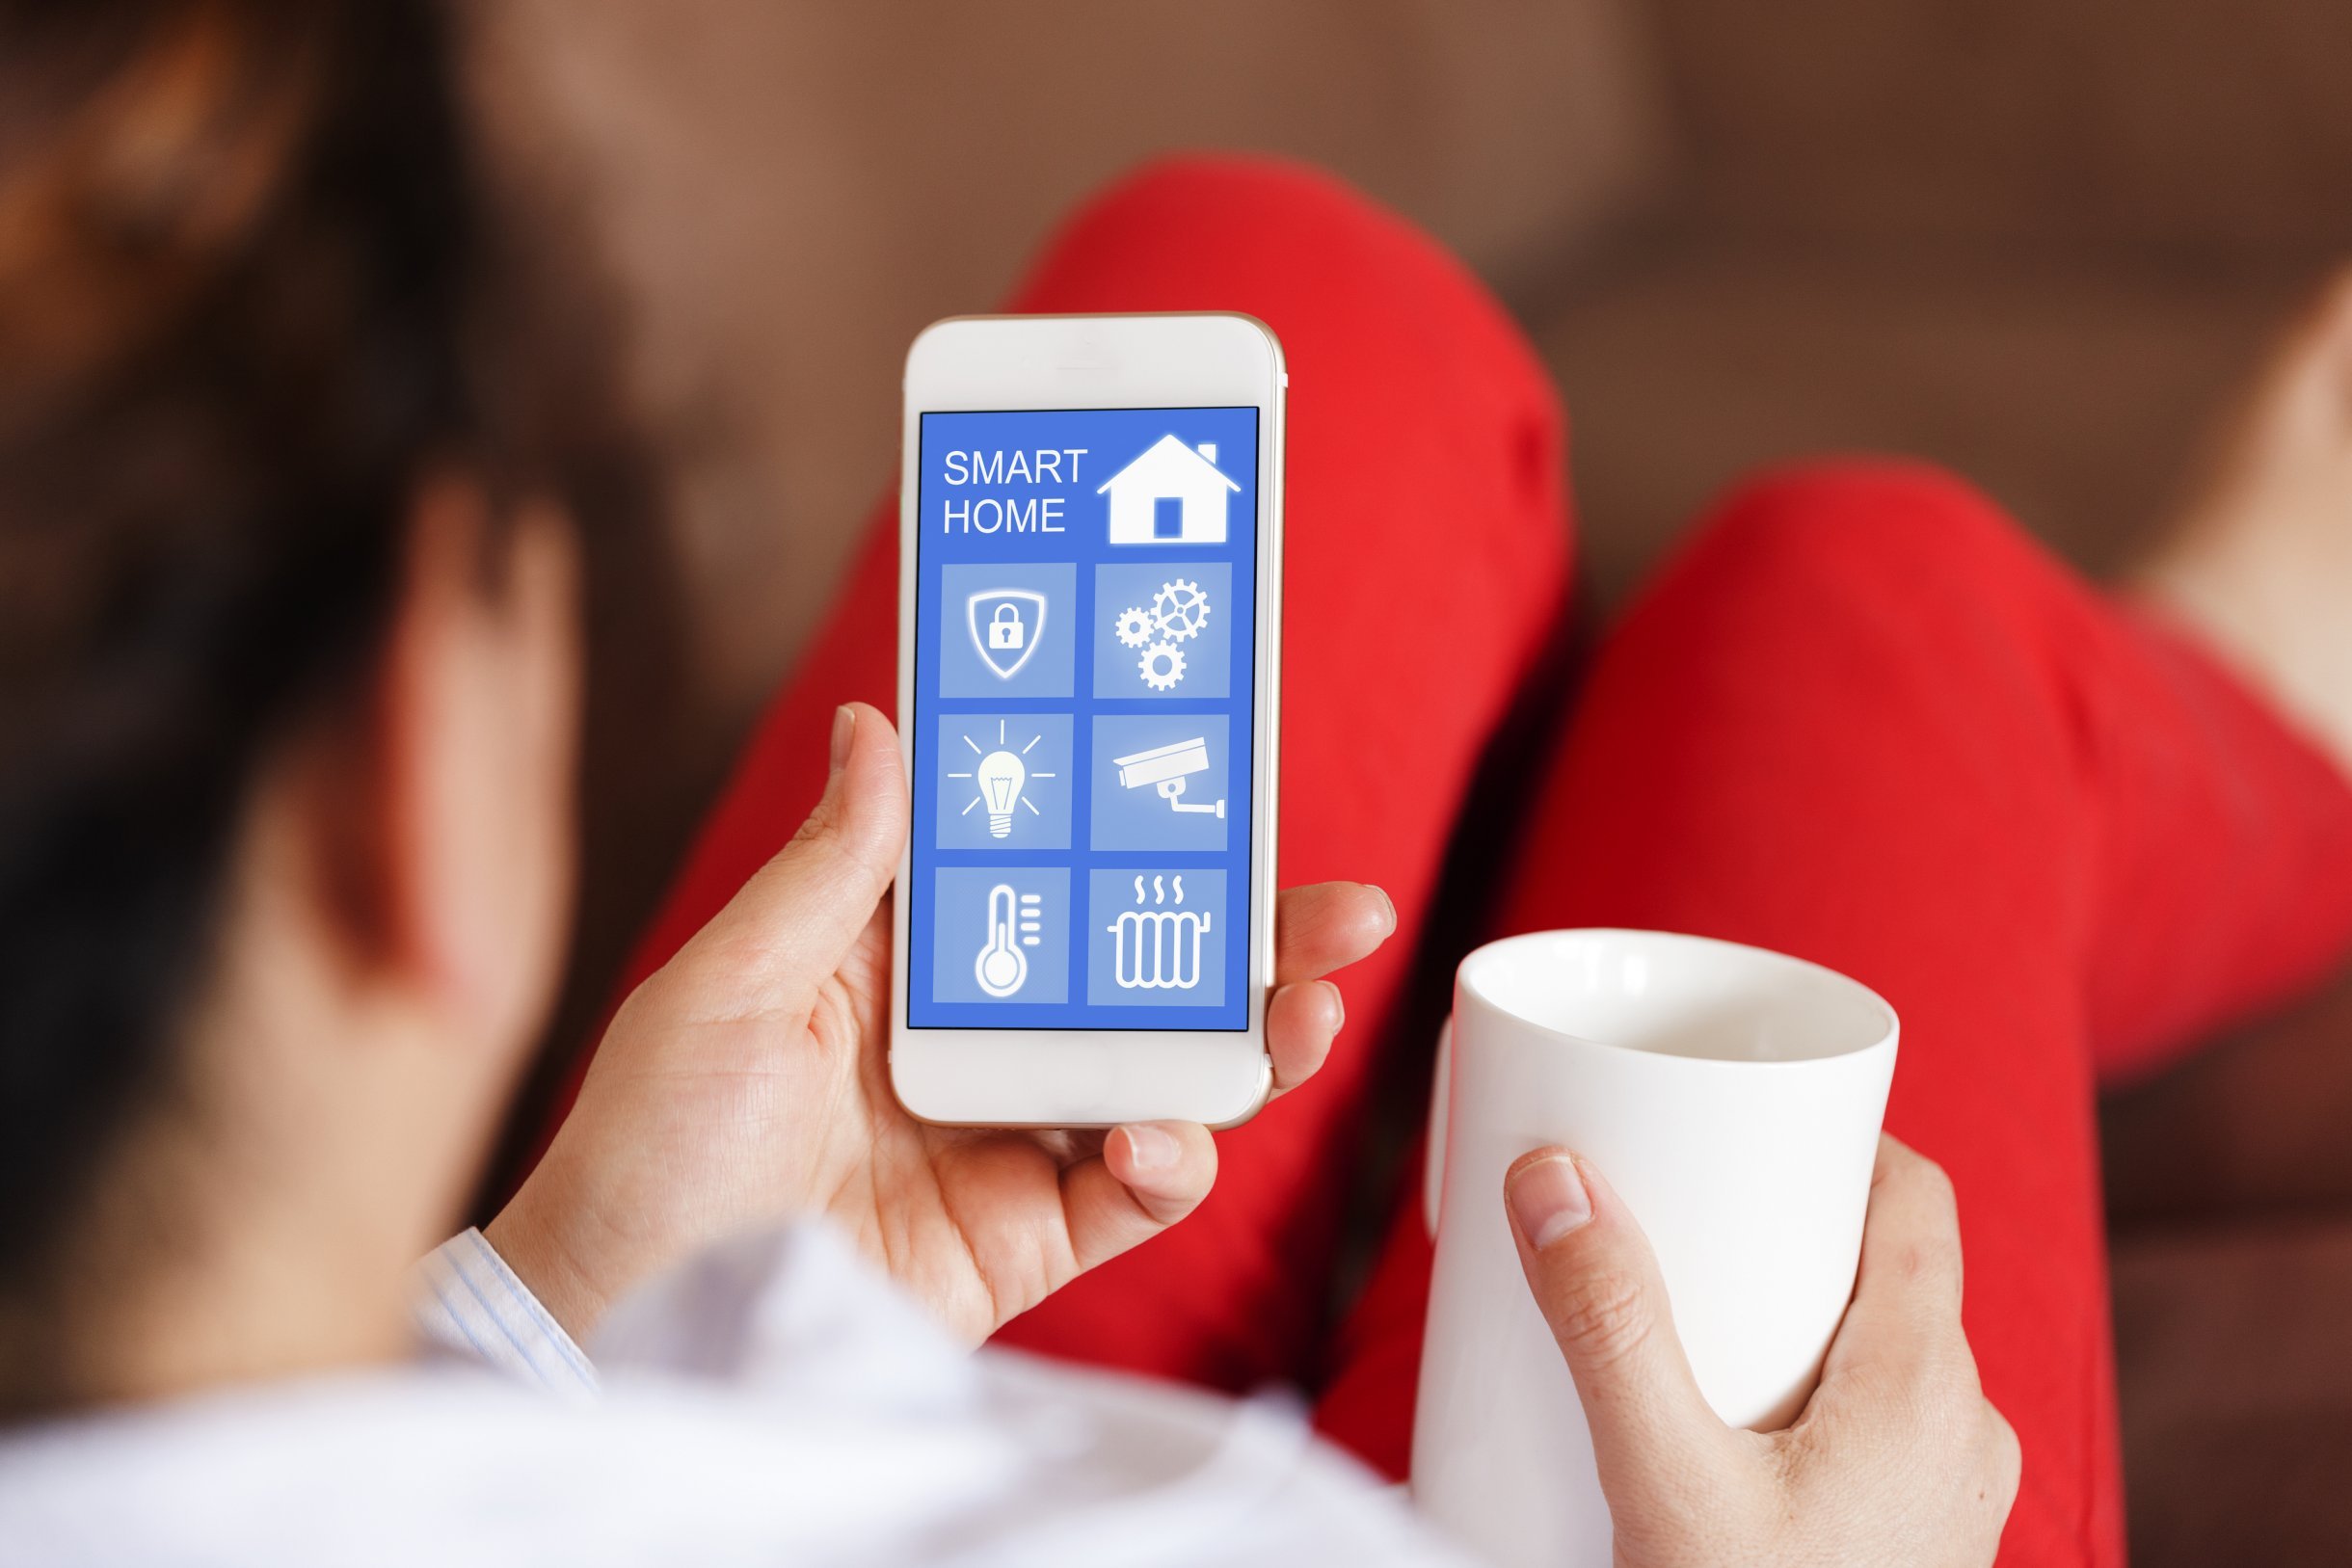 Can telcos create a compelling smart home?